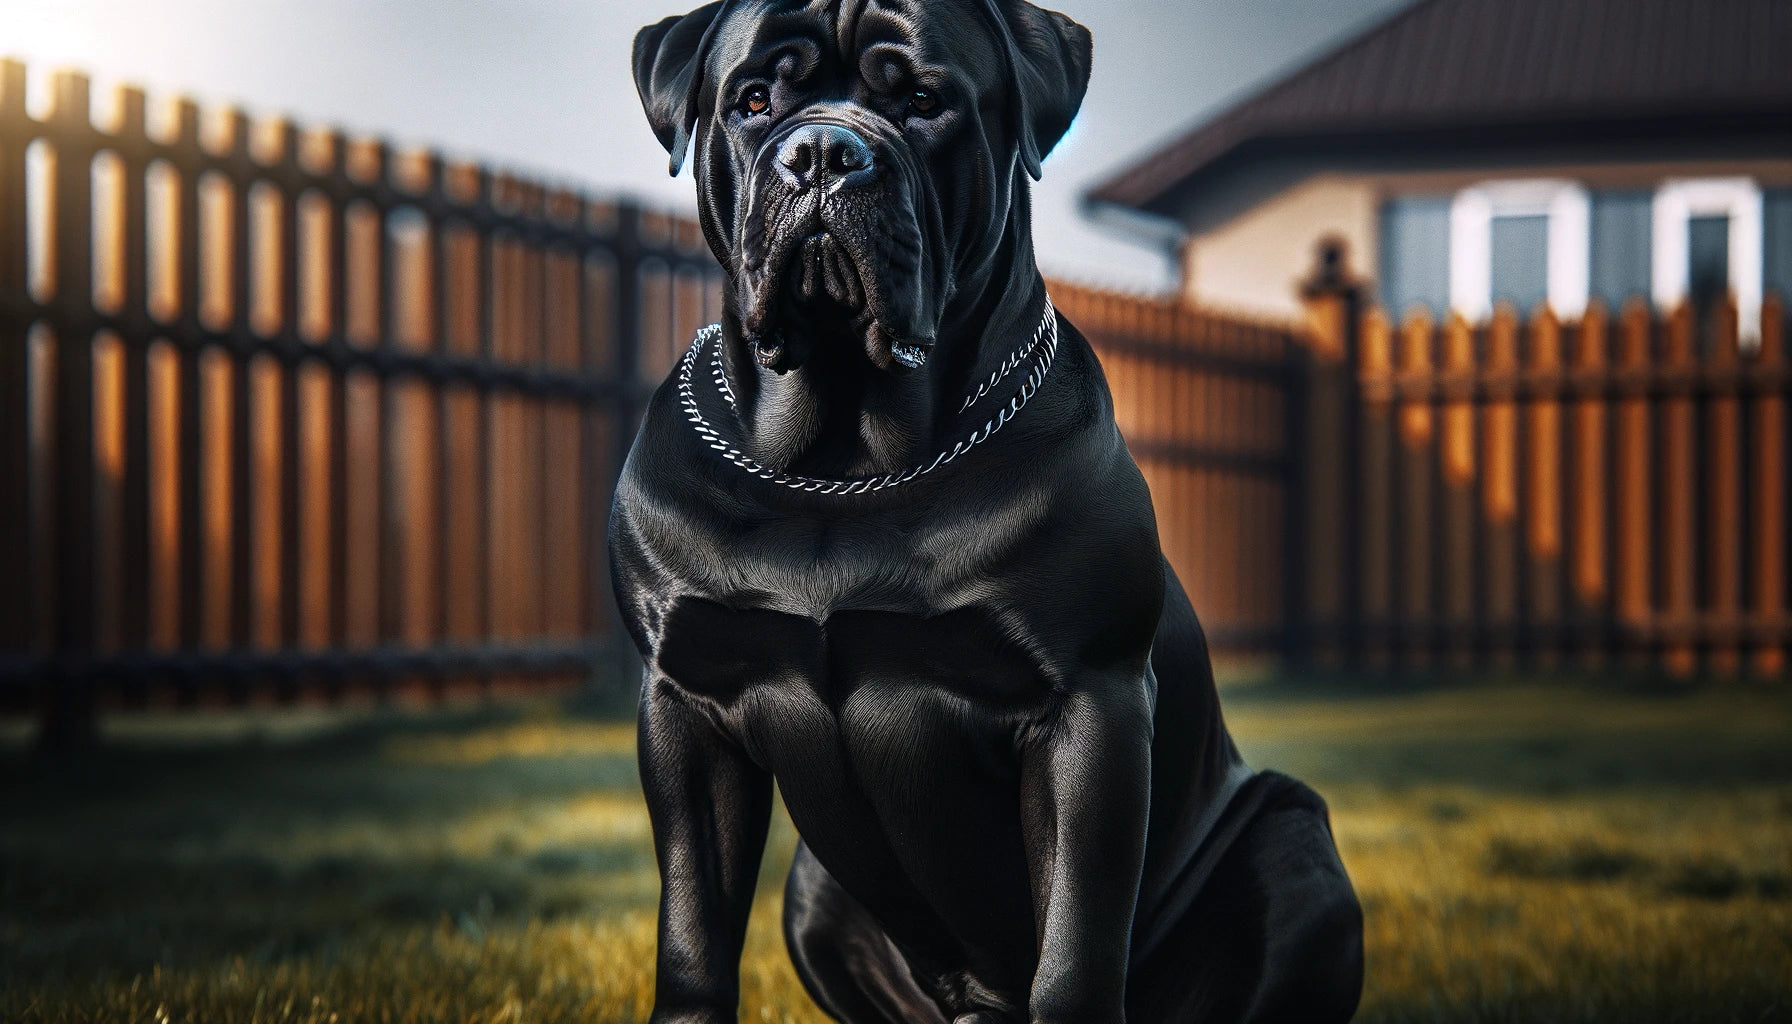 Black Cane Corso dog in a sitting position with its full body